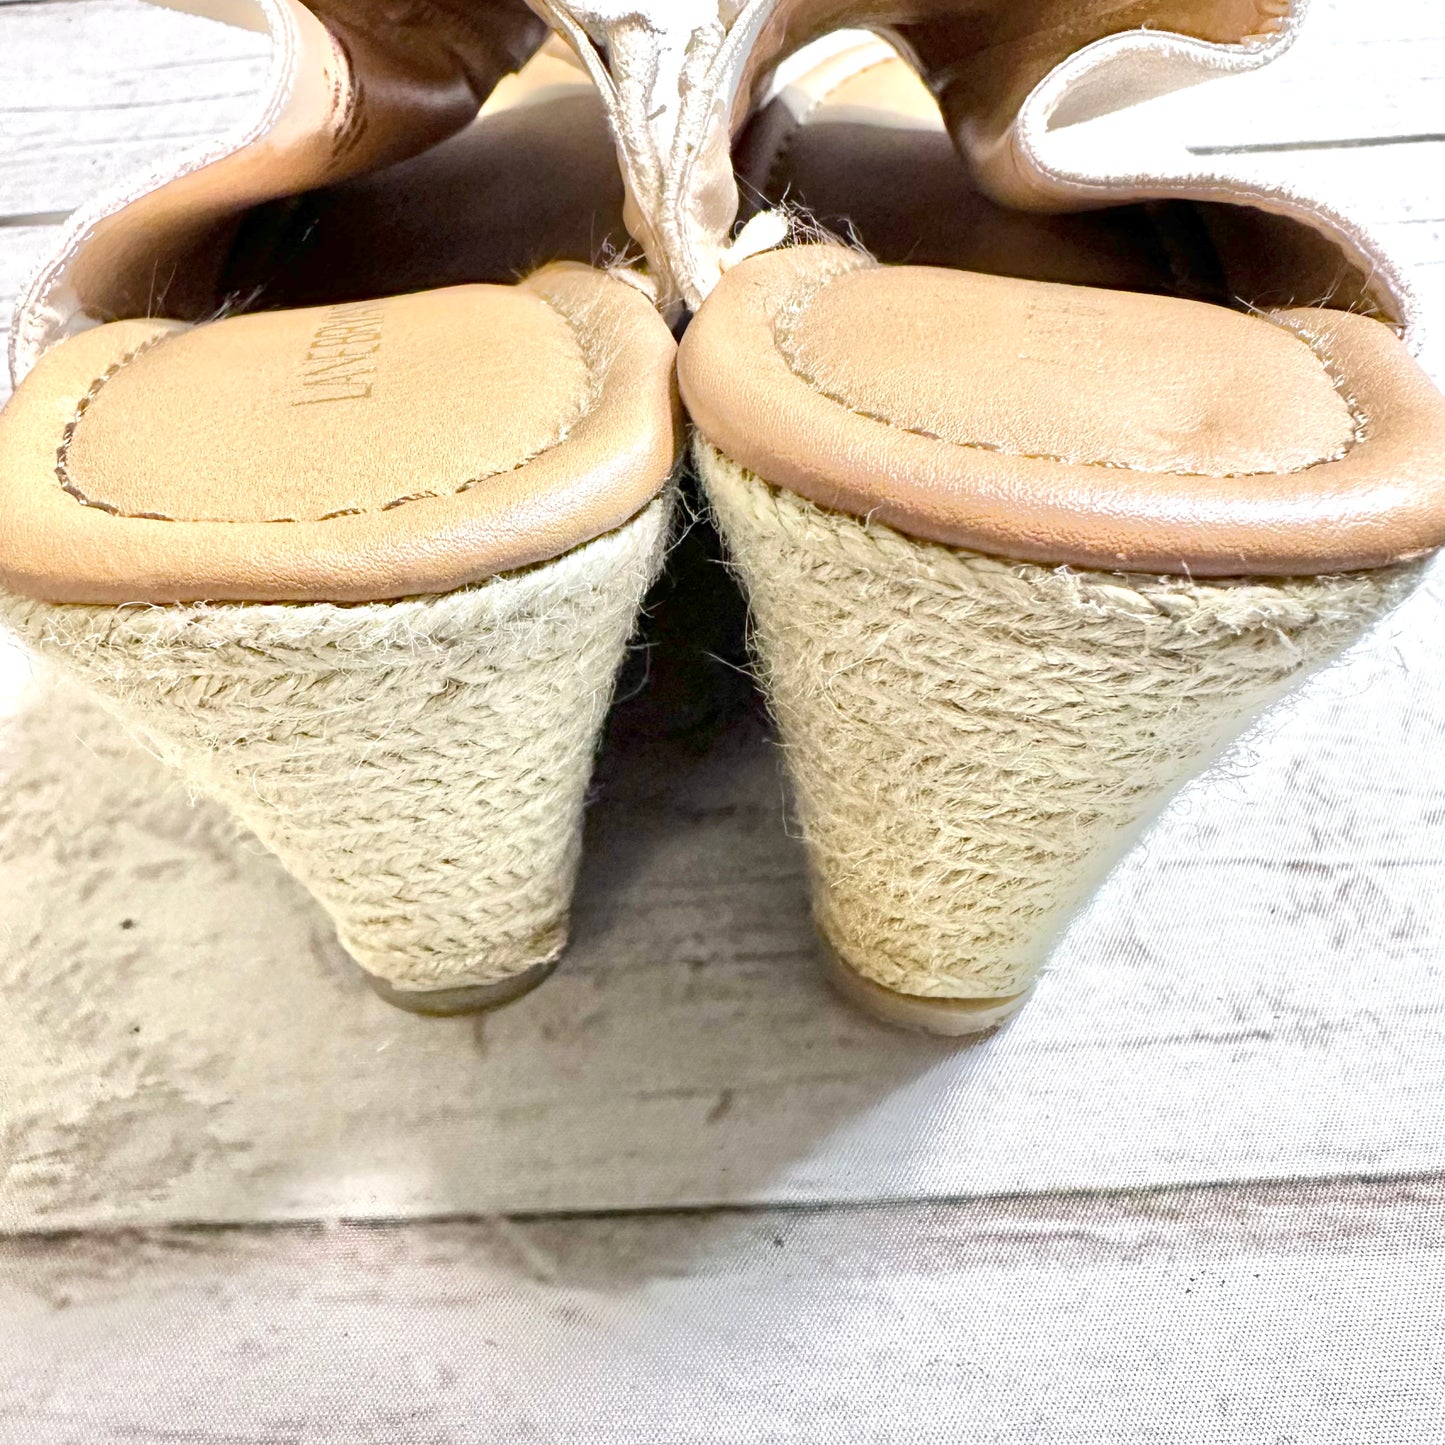 Sandals Heels Wedge By Lane Bryant  Size: 12